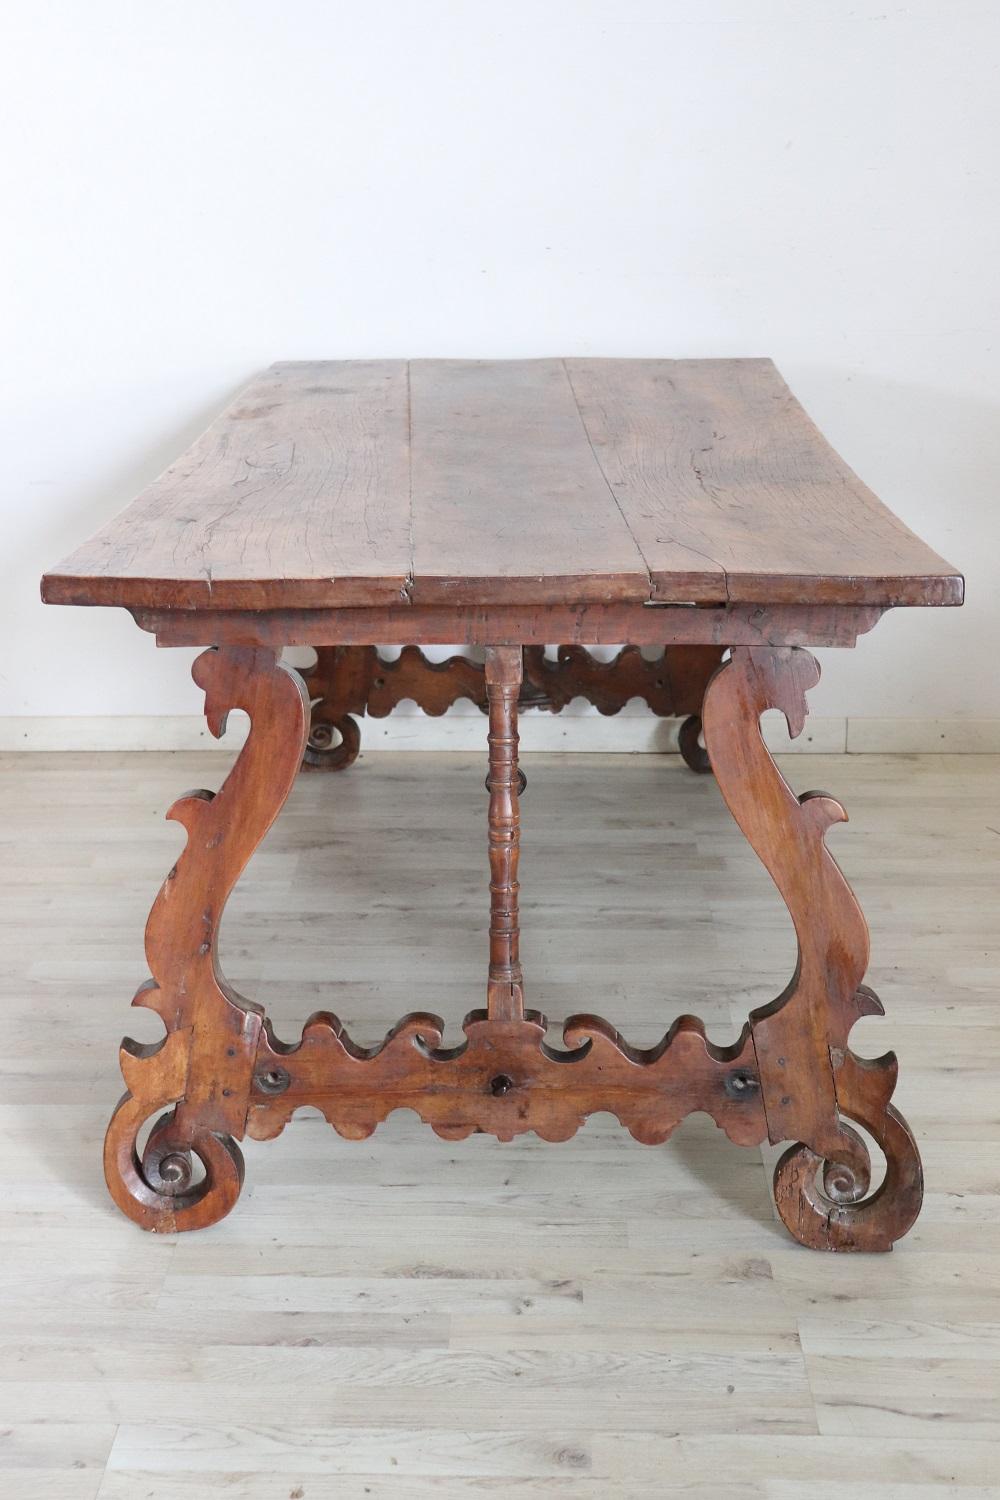 Early 17th Century Italian Cherry Wood Antique Fratino Table with Lyre Legs 1